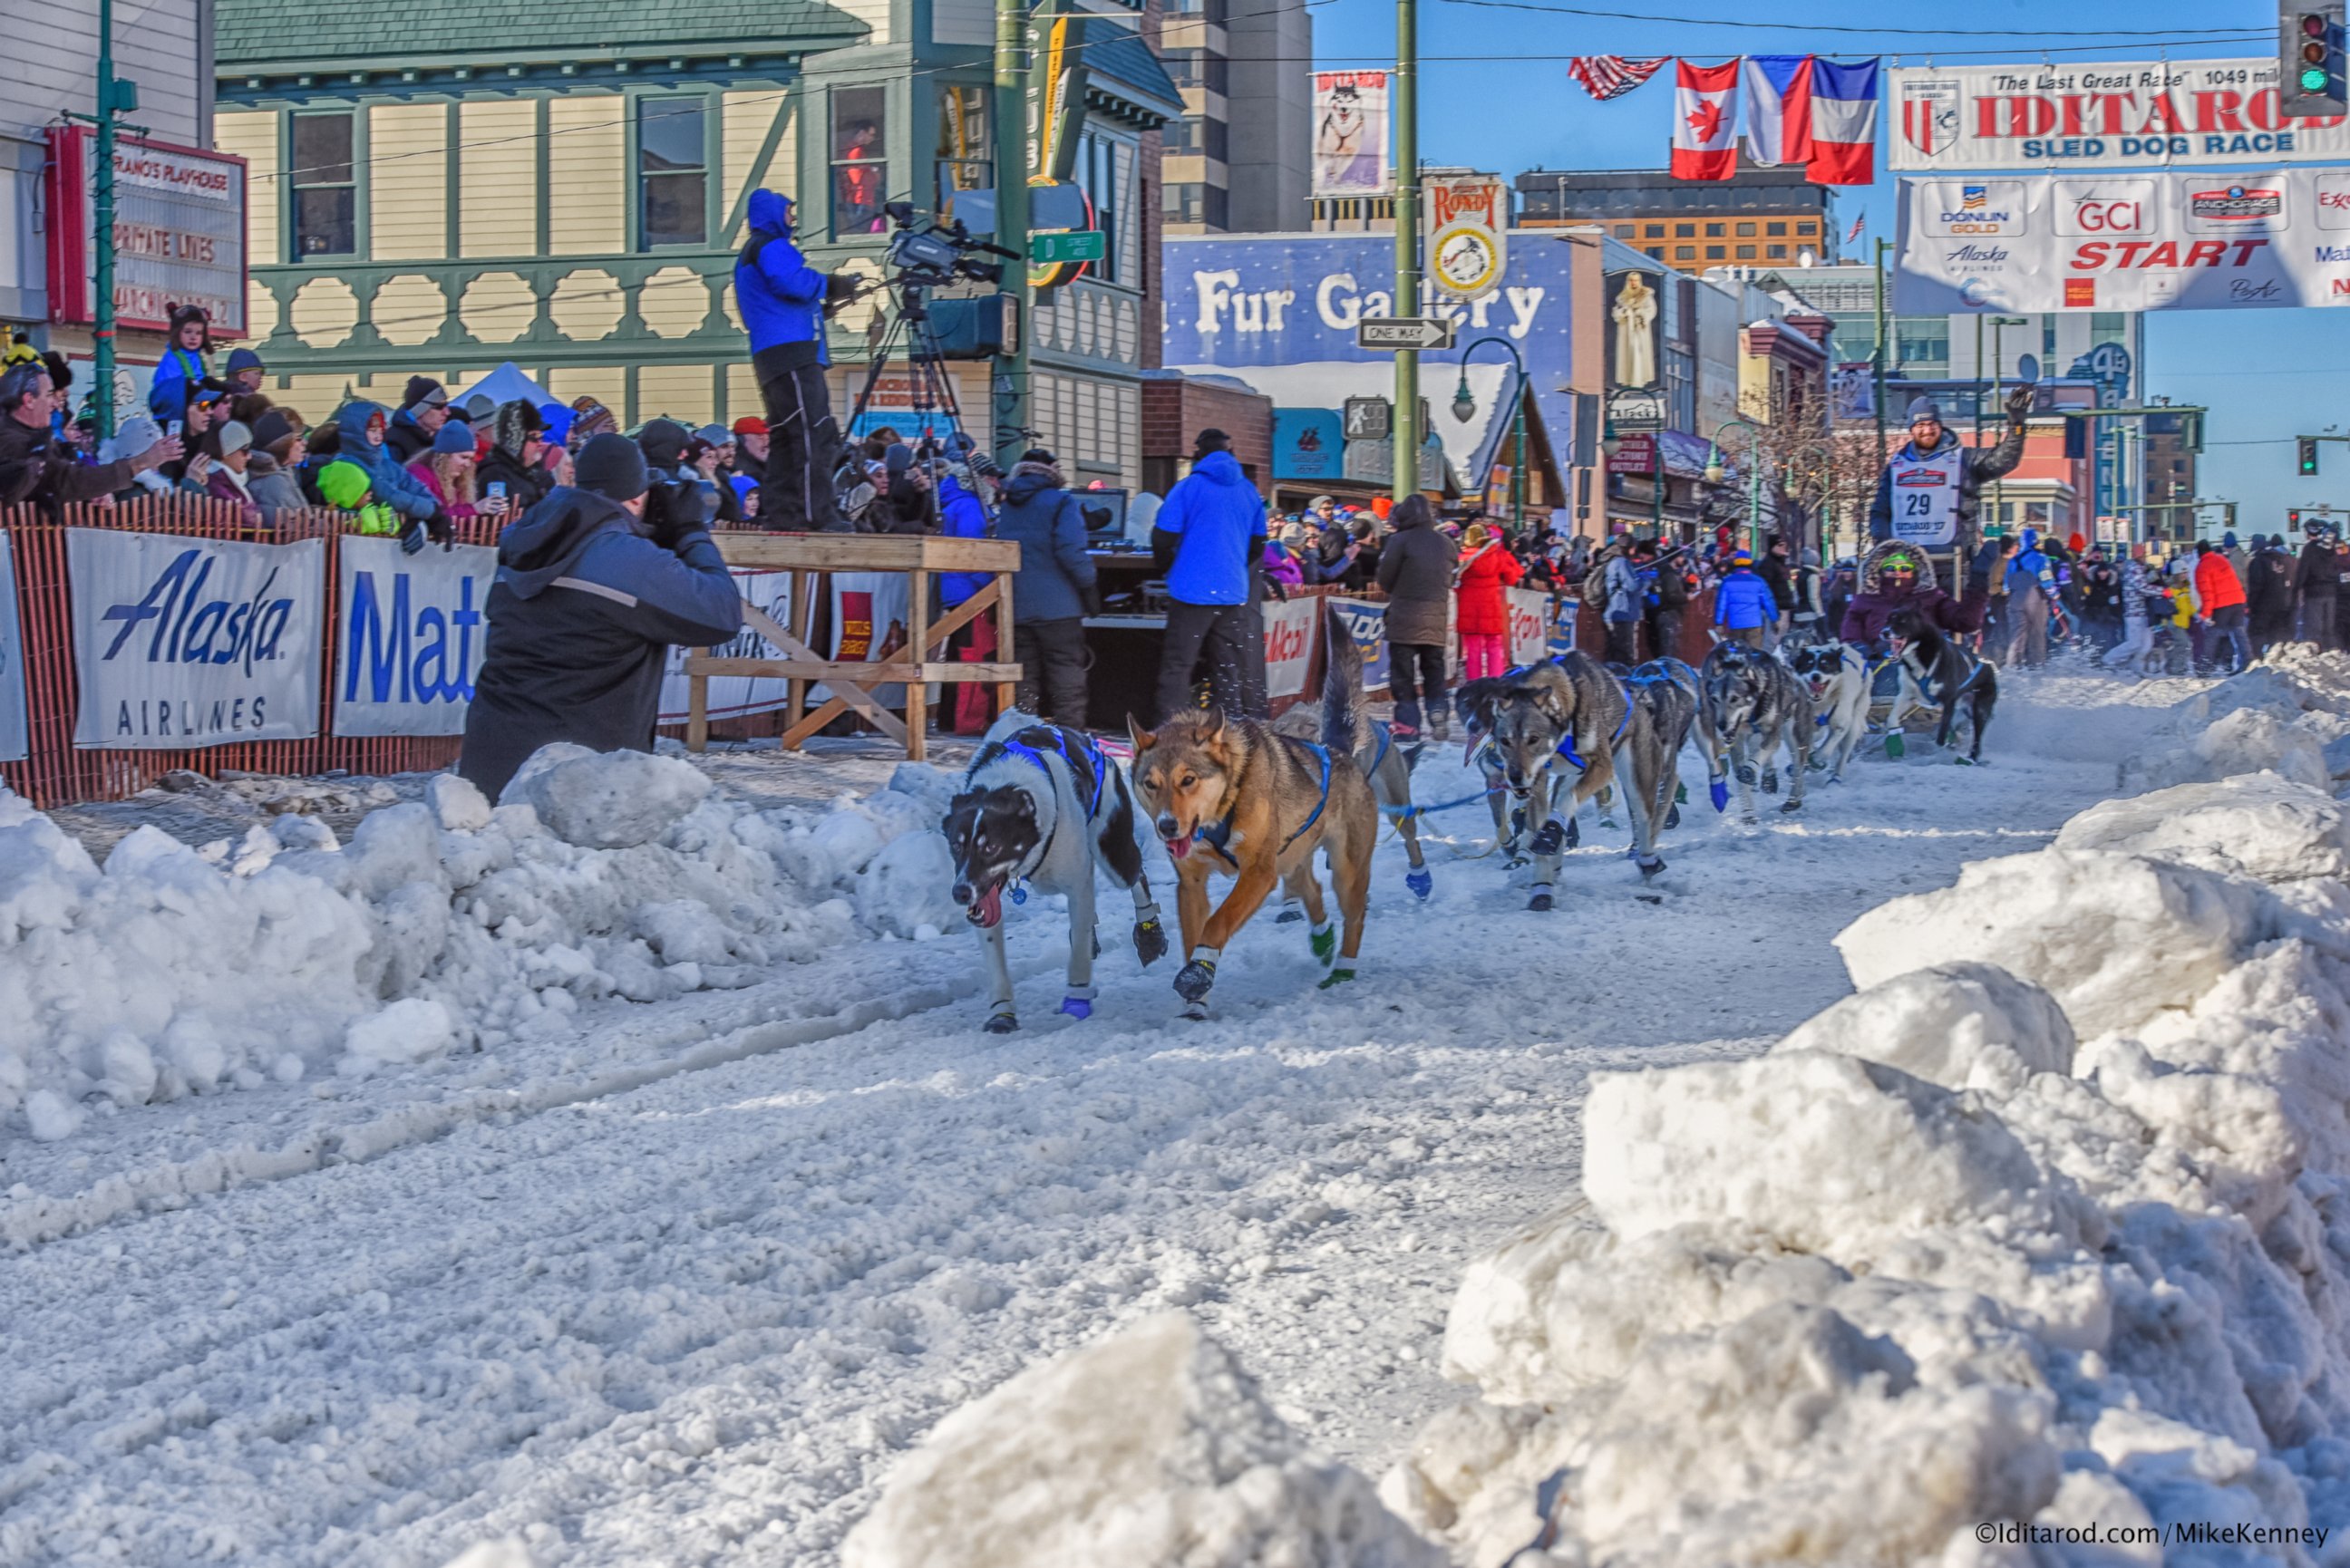 PHOTO: Seventy-two mushers are competing this year in the 2017 Iditarod race, 17 of whom are rookies. The oldest musher this year is 63; the youngest is 20.